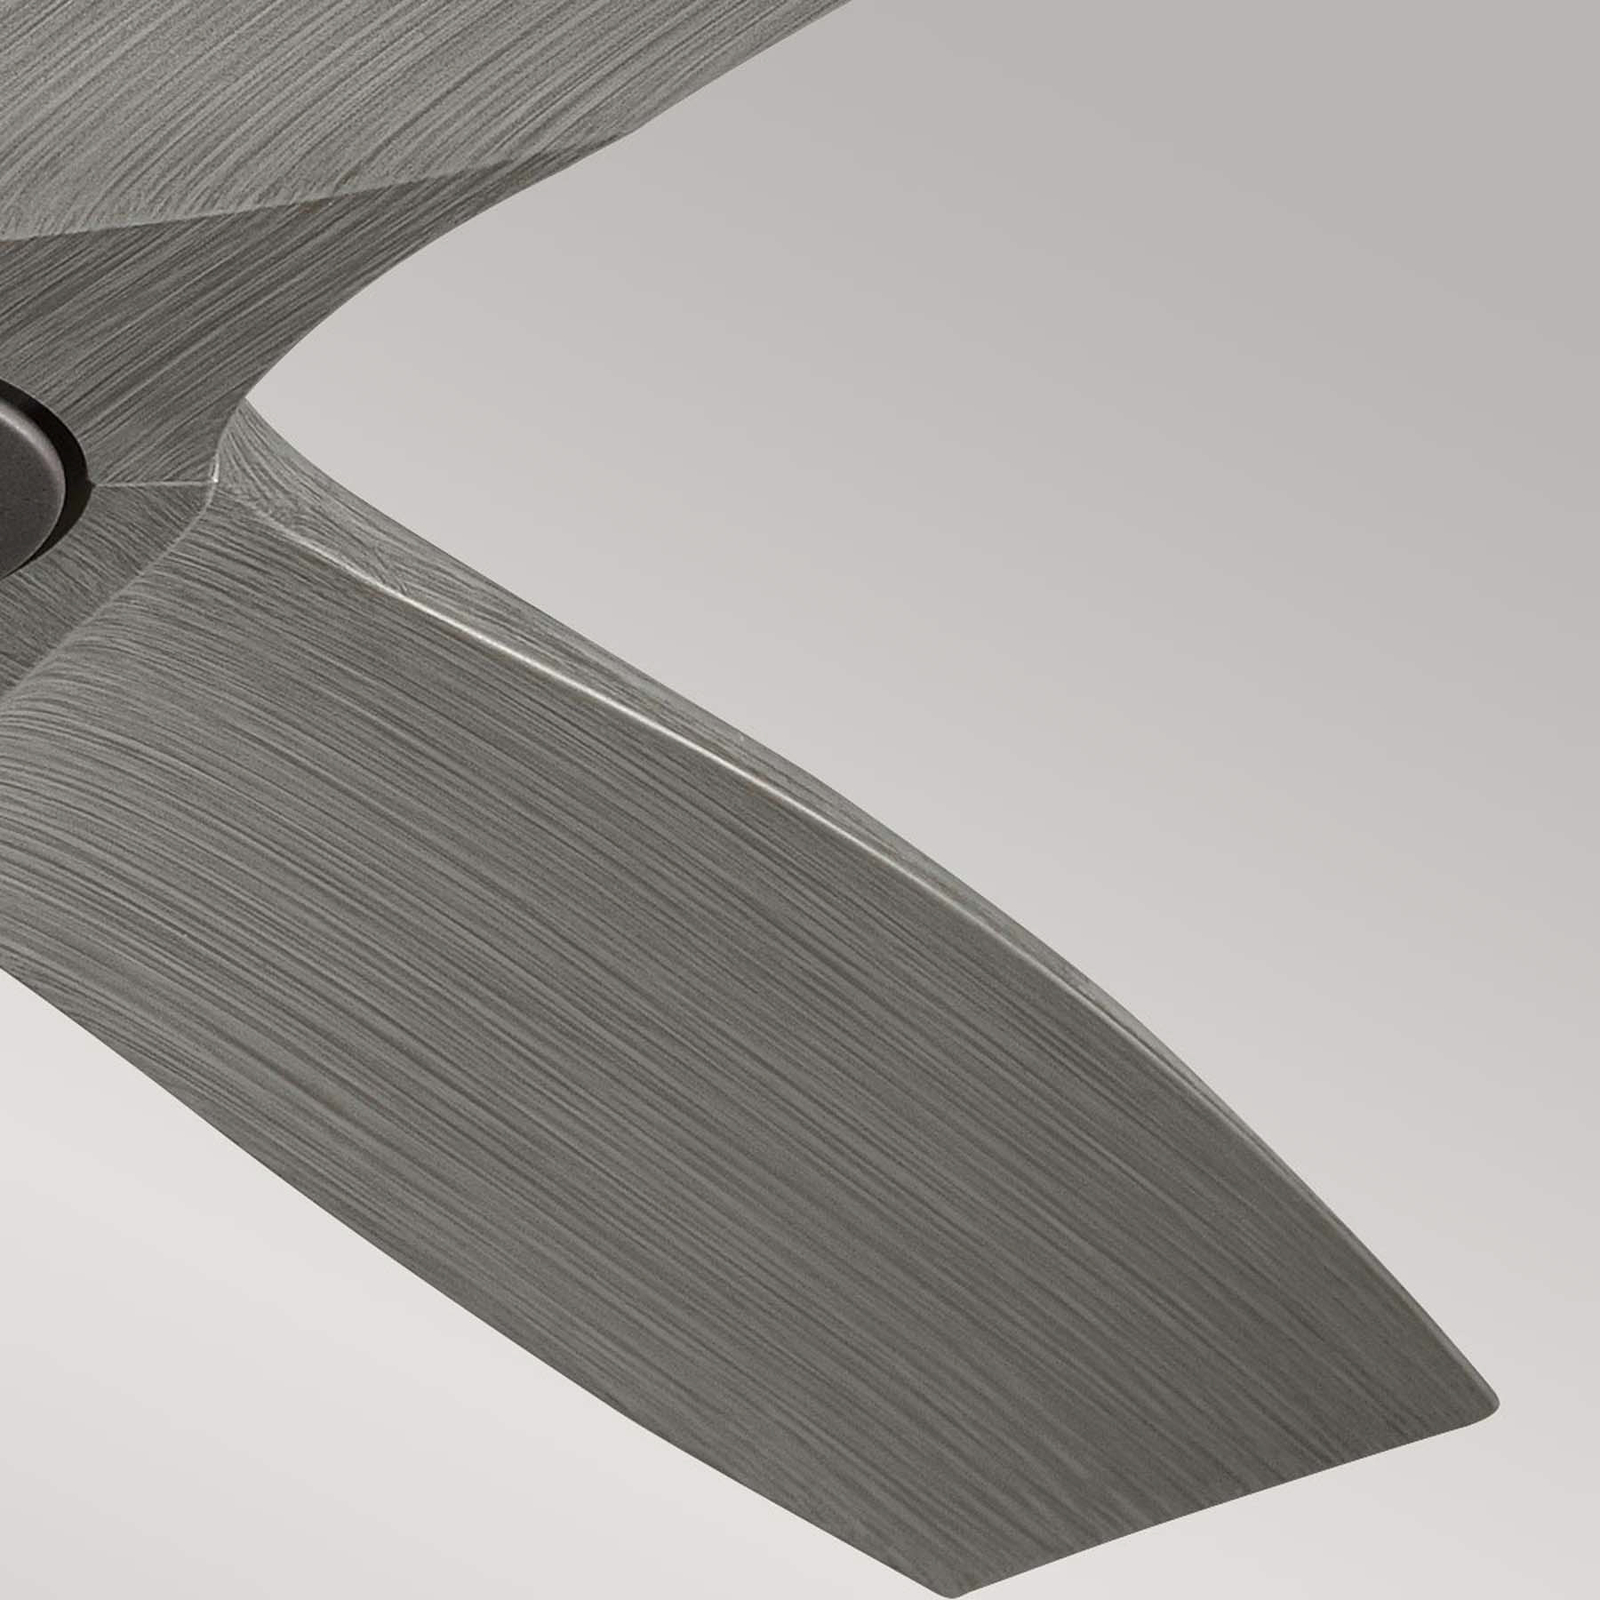 Ried ceiling fan, three-blade, iron-coloured